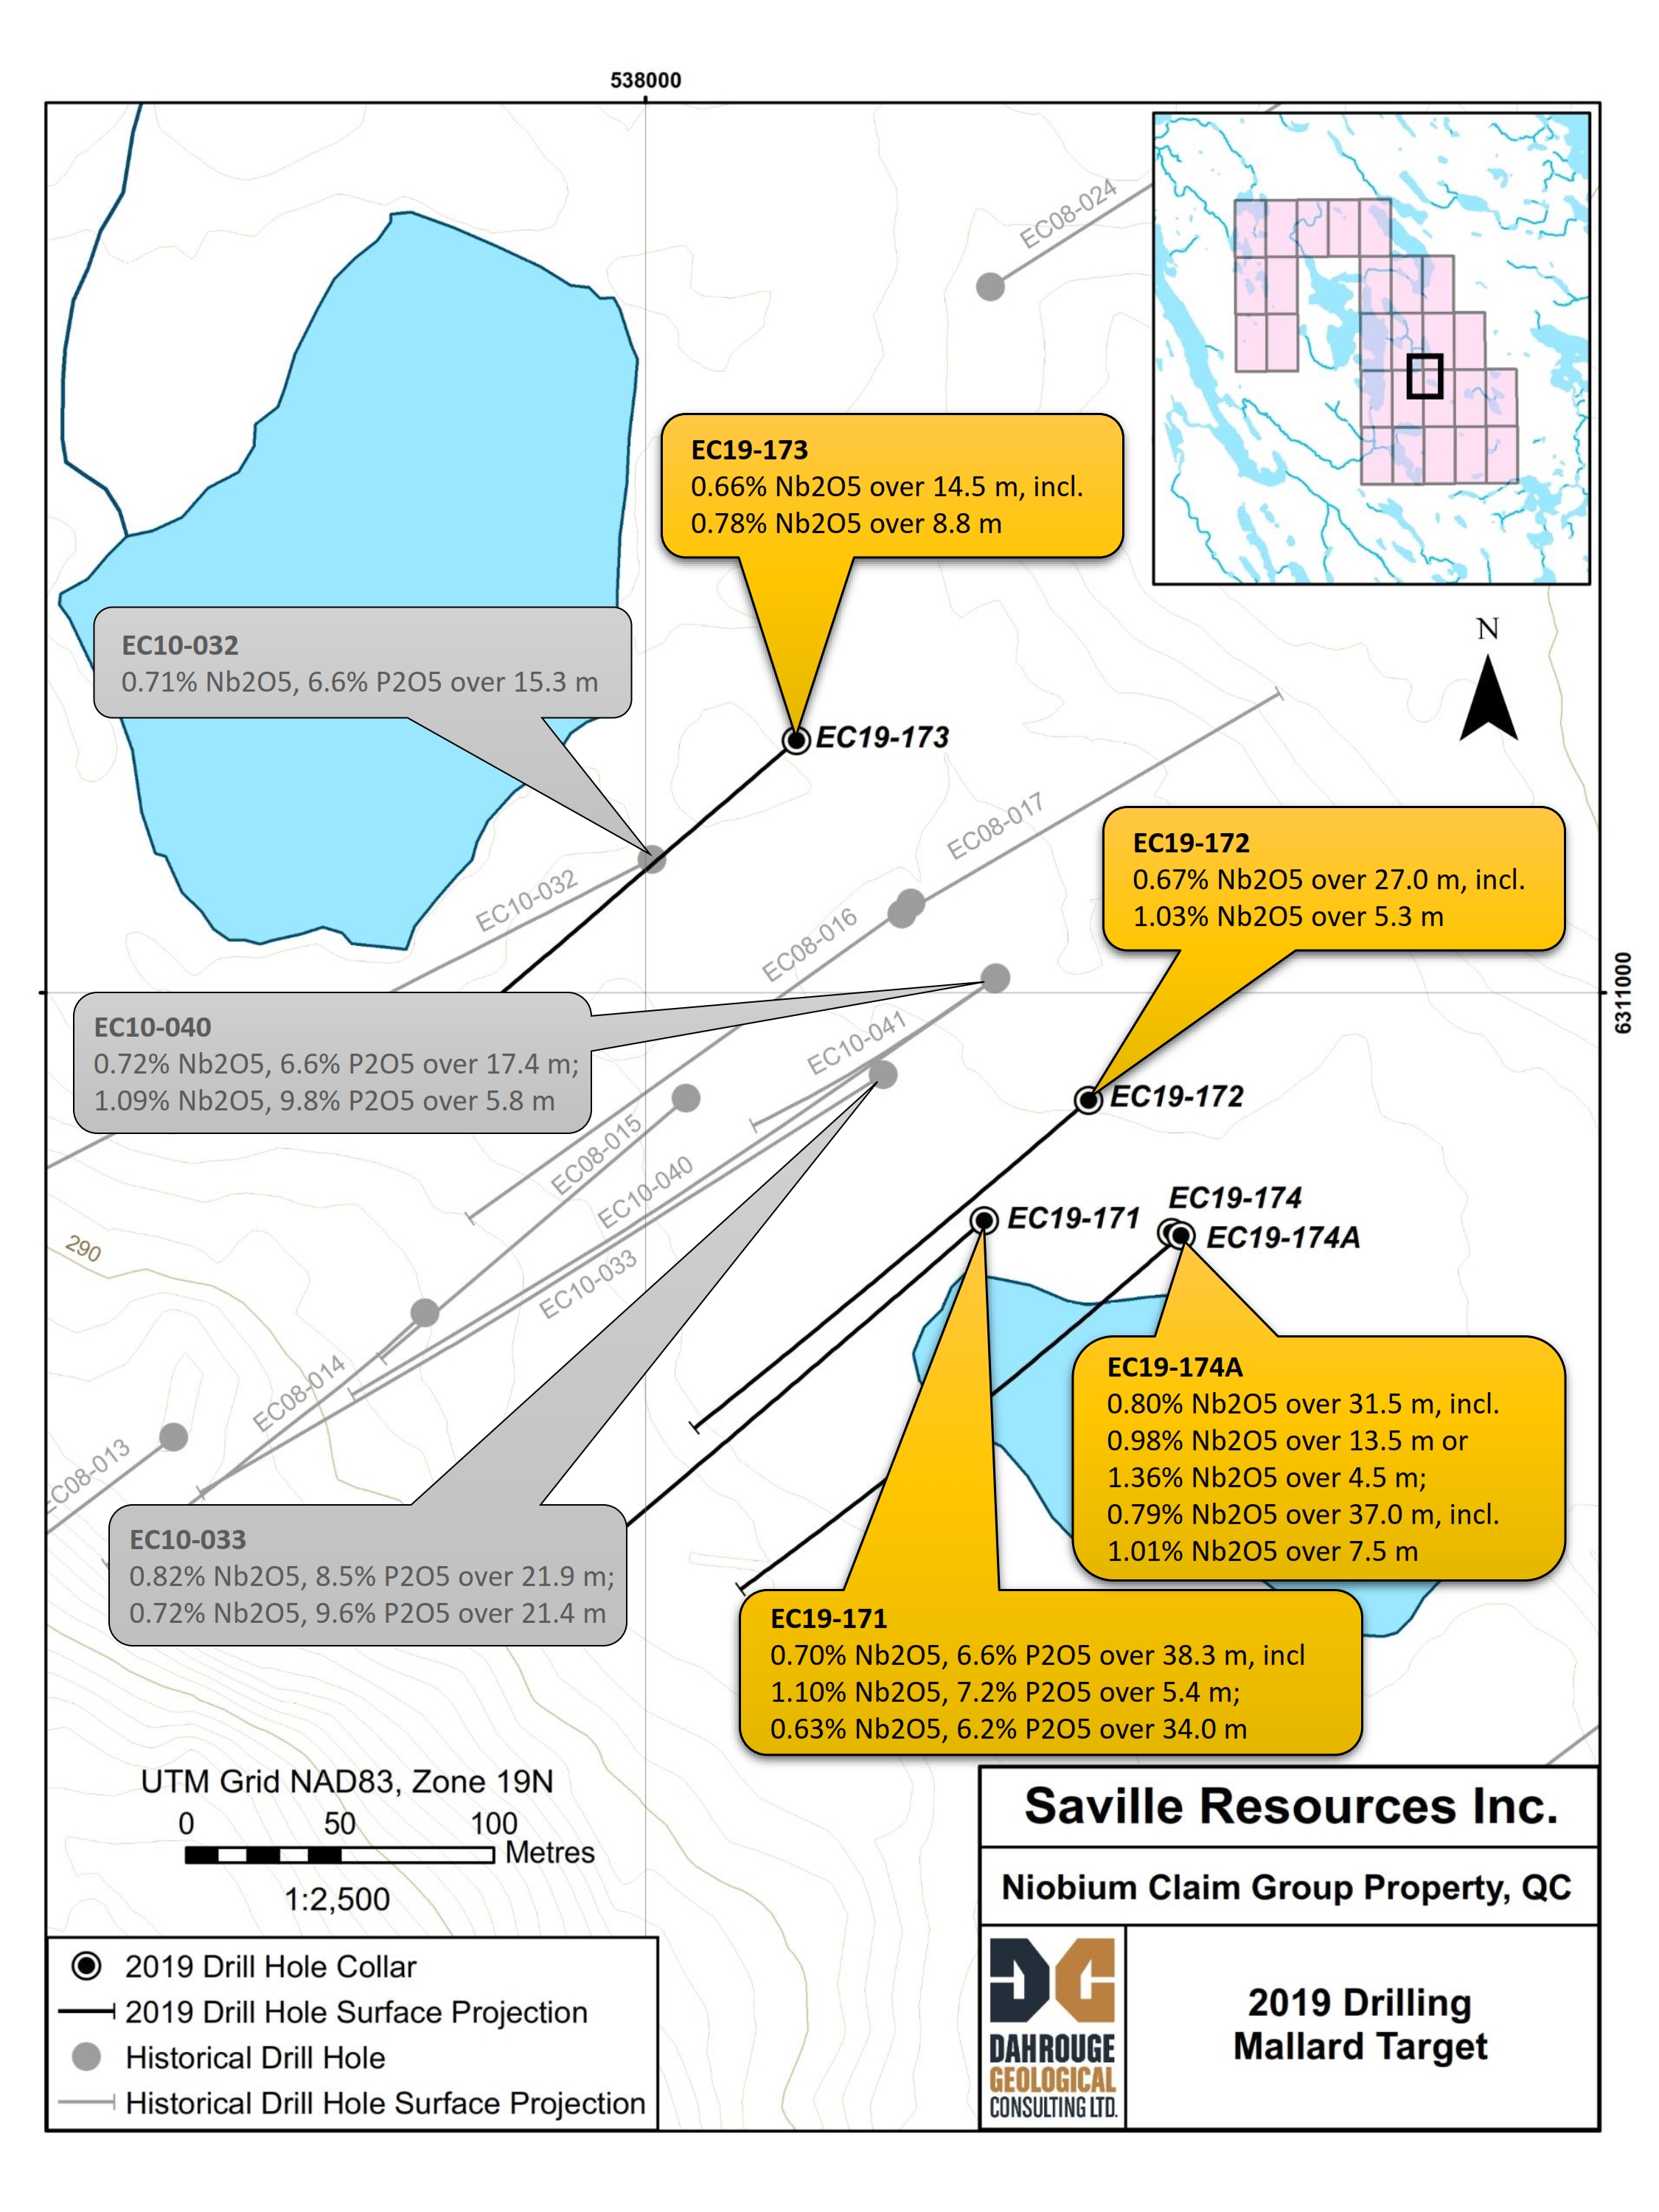 Saville Resources Inc., Monday, September 16, 2019, Press release picture